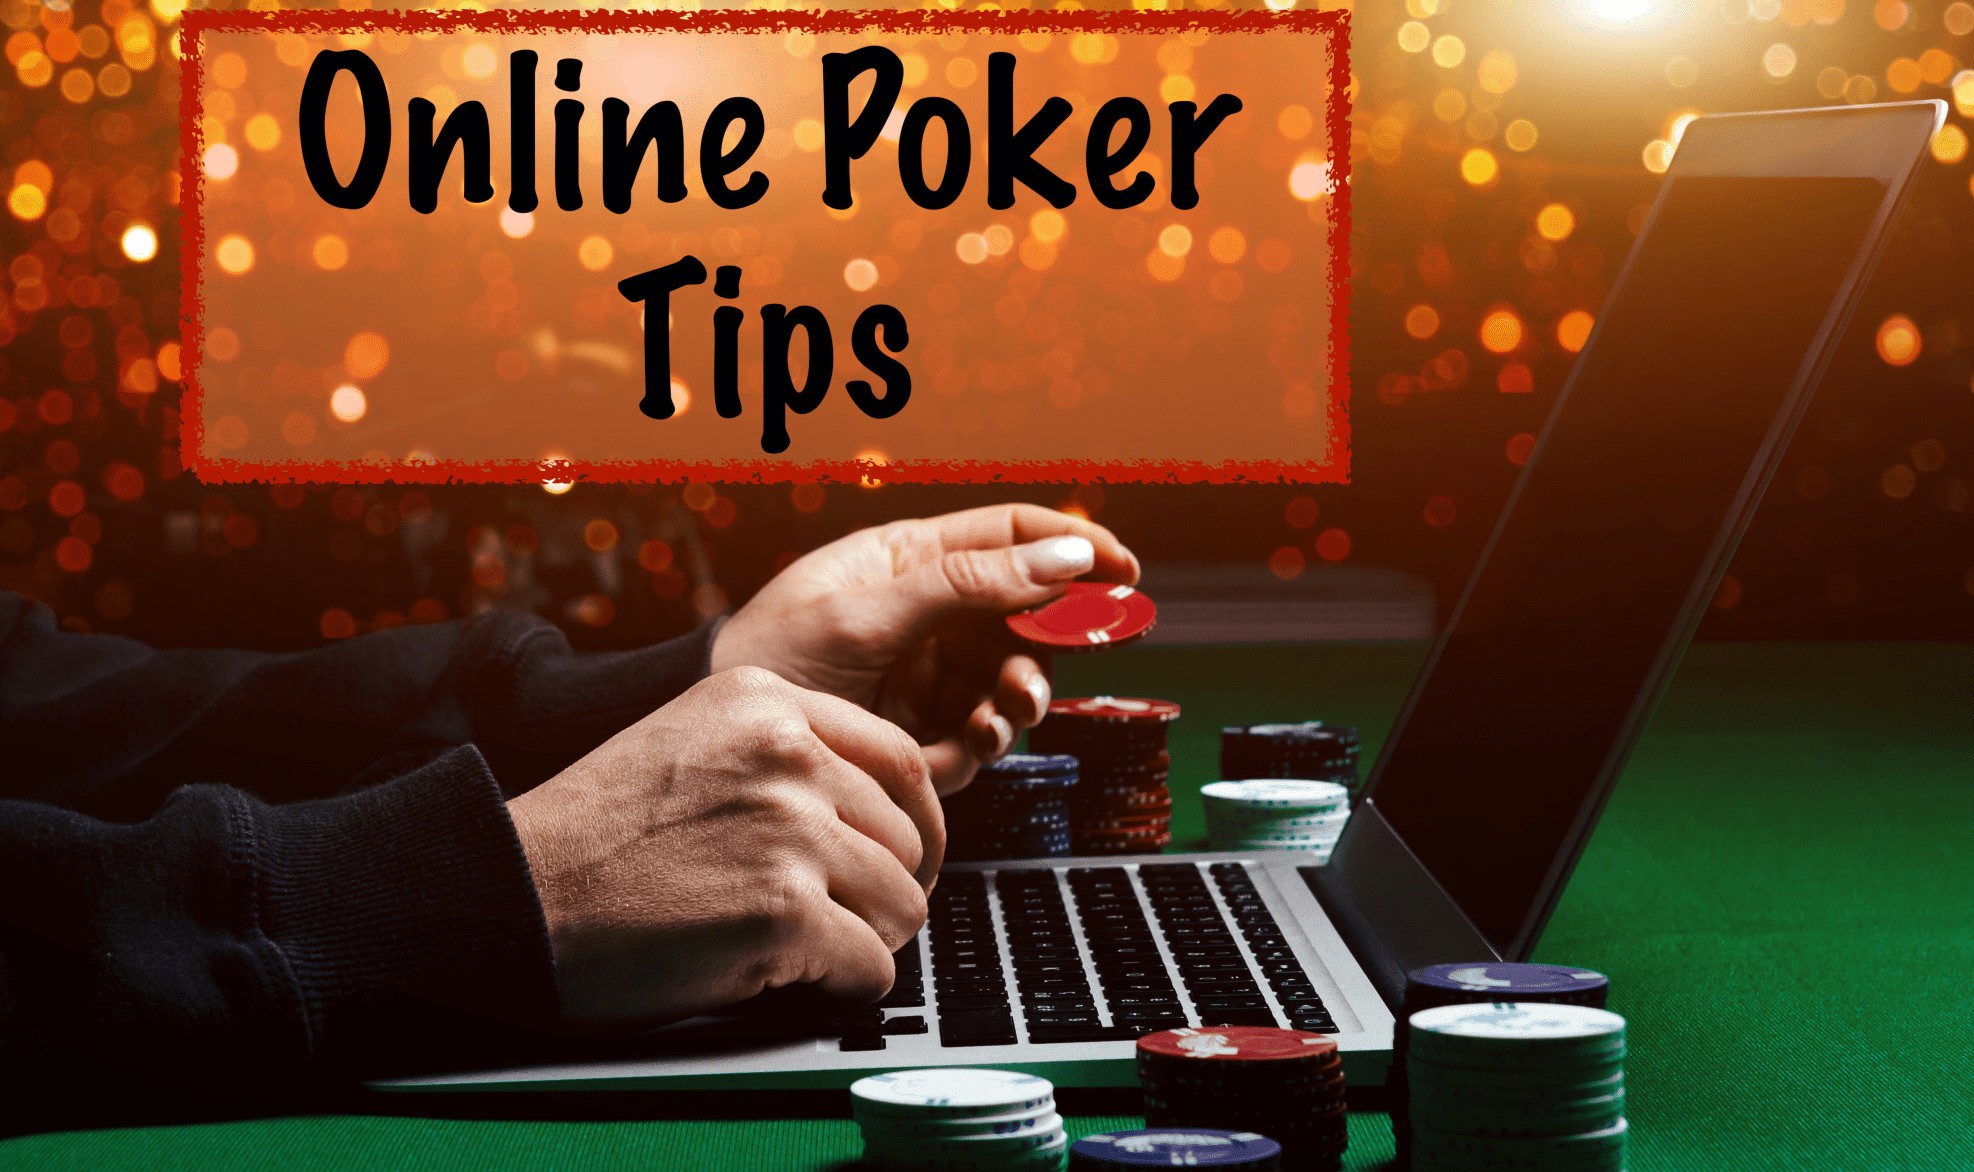 Tips on How to Win Online Poker